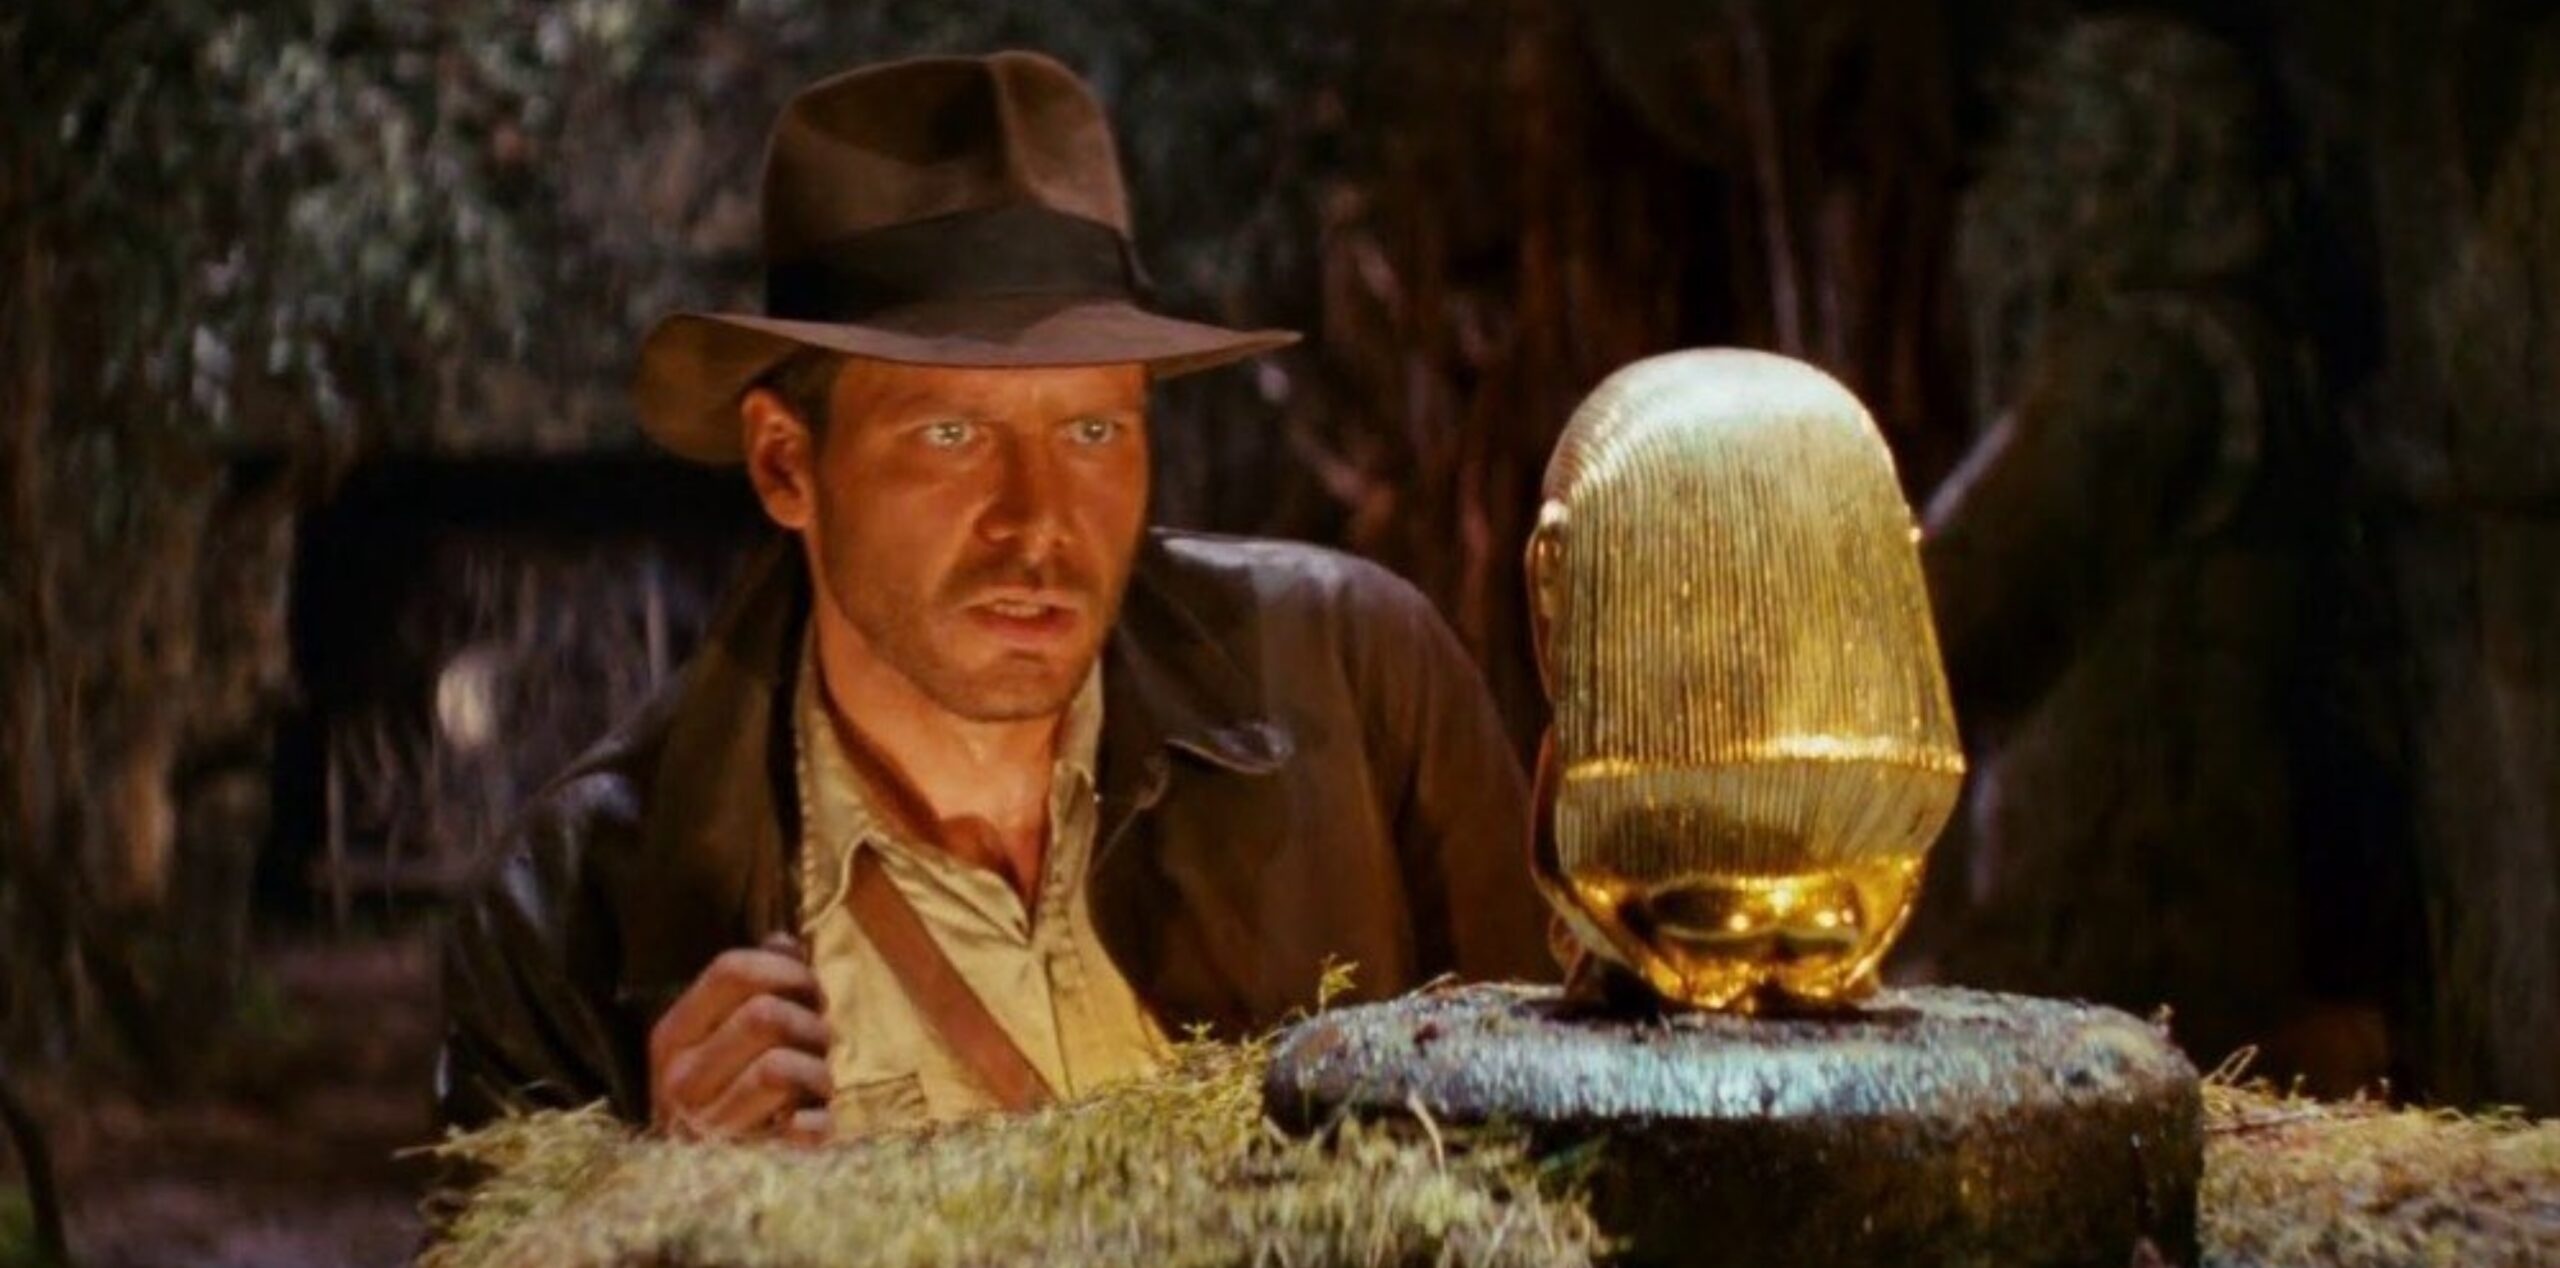 Harrison Ford (Indiana Jones): Indy, Named the greatest movie character by Empire magazine. 2560x1270 Dual Screen Background.